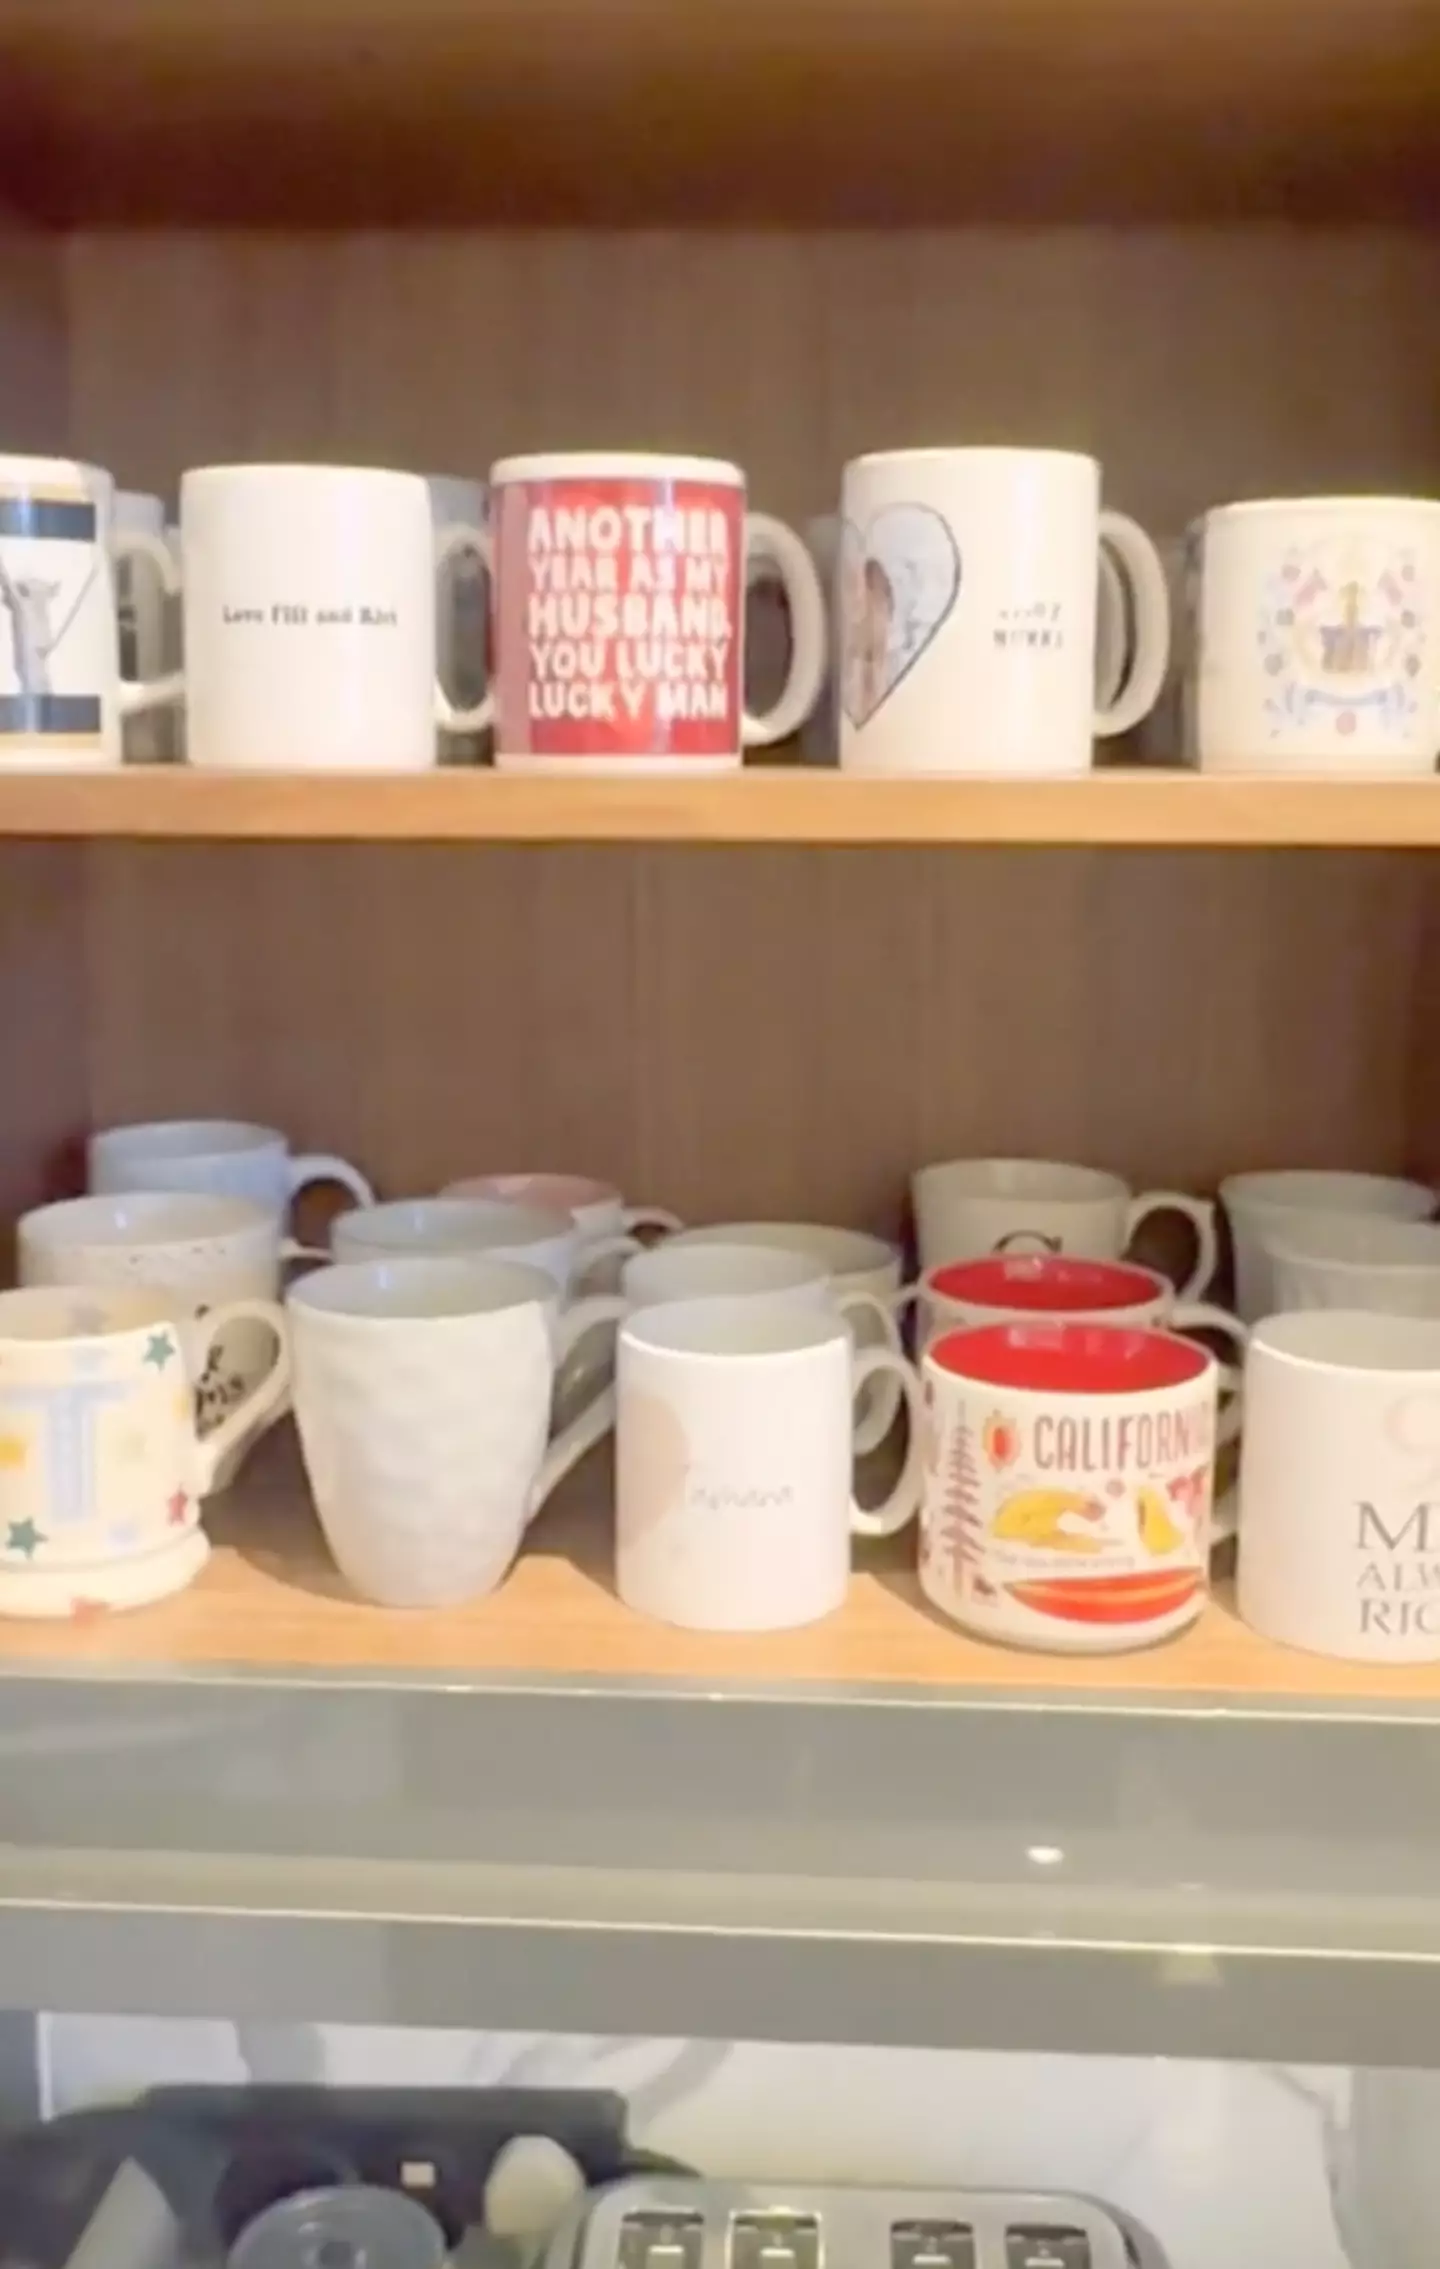 People found the mug collection hilarious.